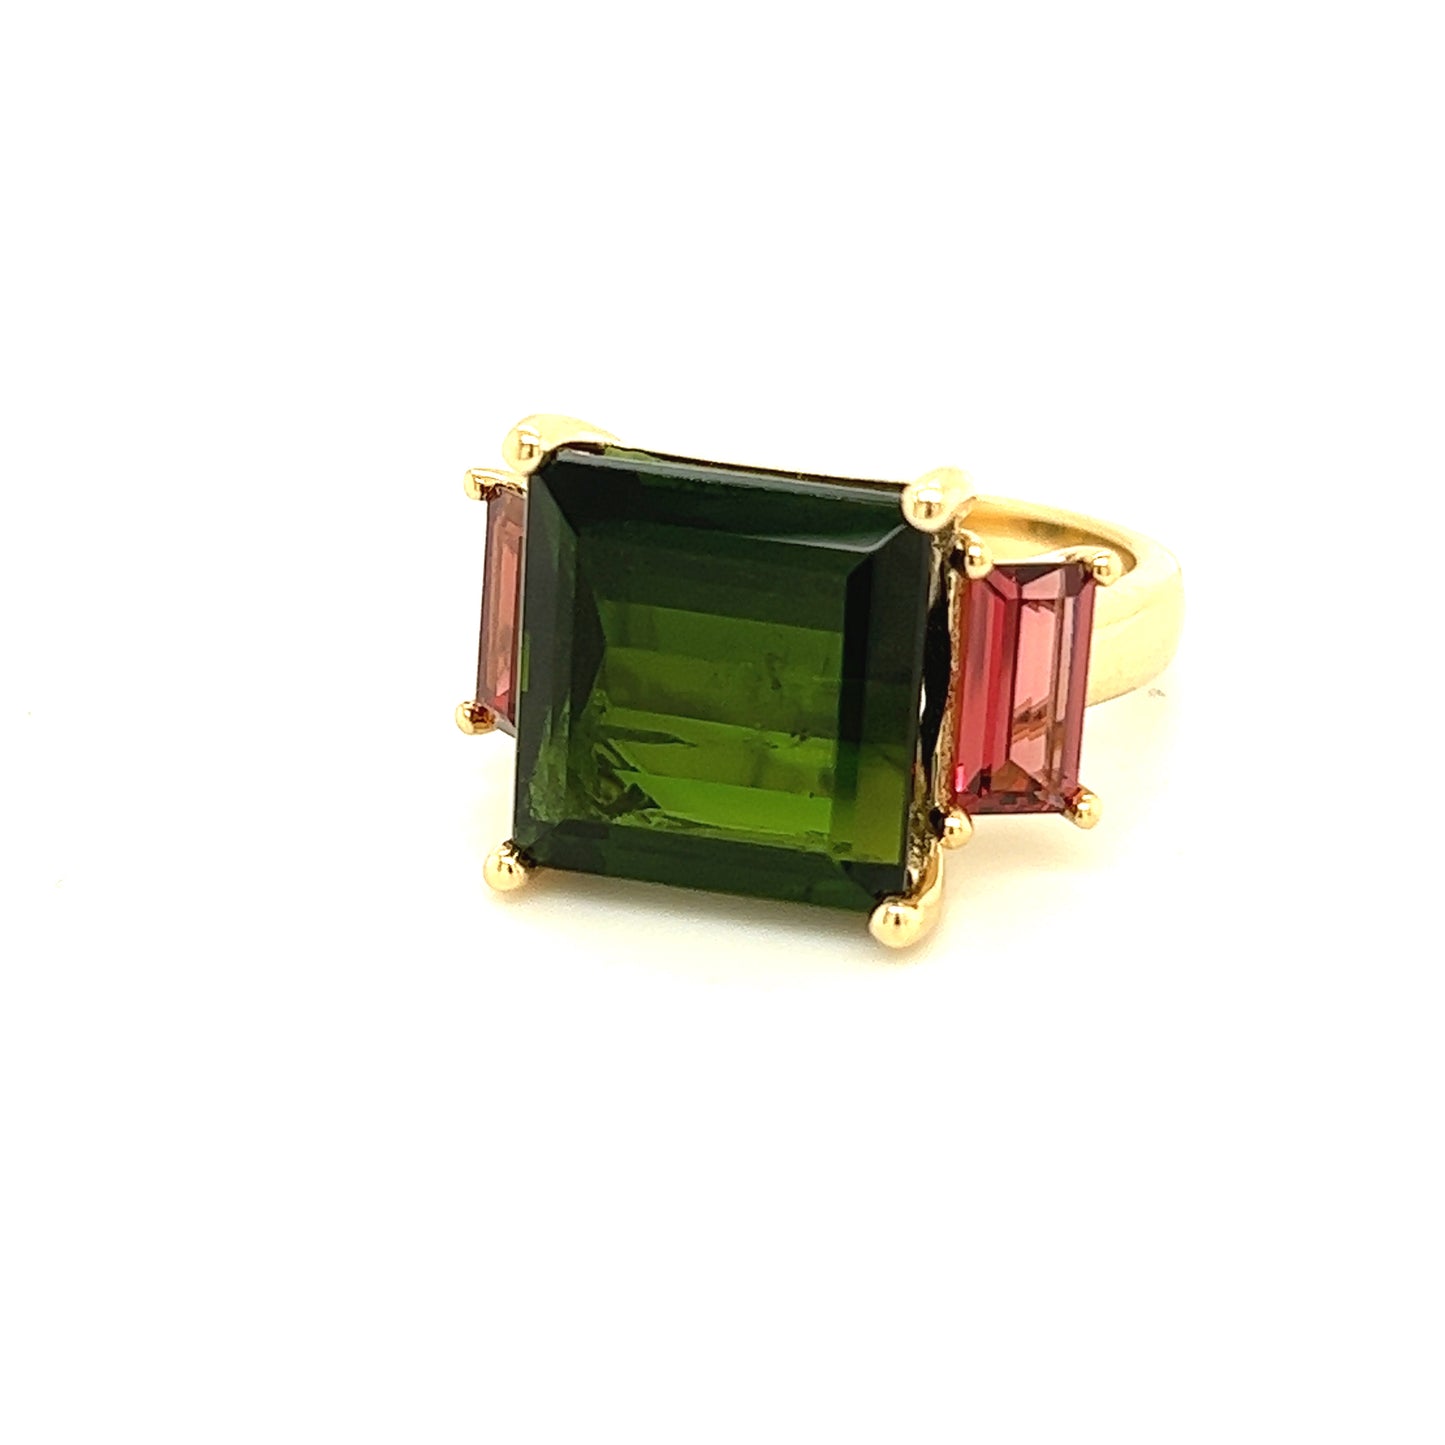 Natural Tourmaline Diamond Ring Size 7 14 Y Gold 12.25 TCW Certified $7,950 219227 - Certified Fine Jewelry